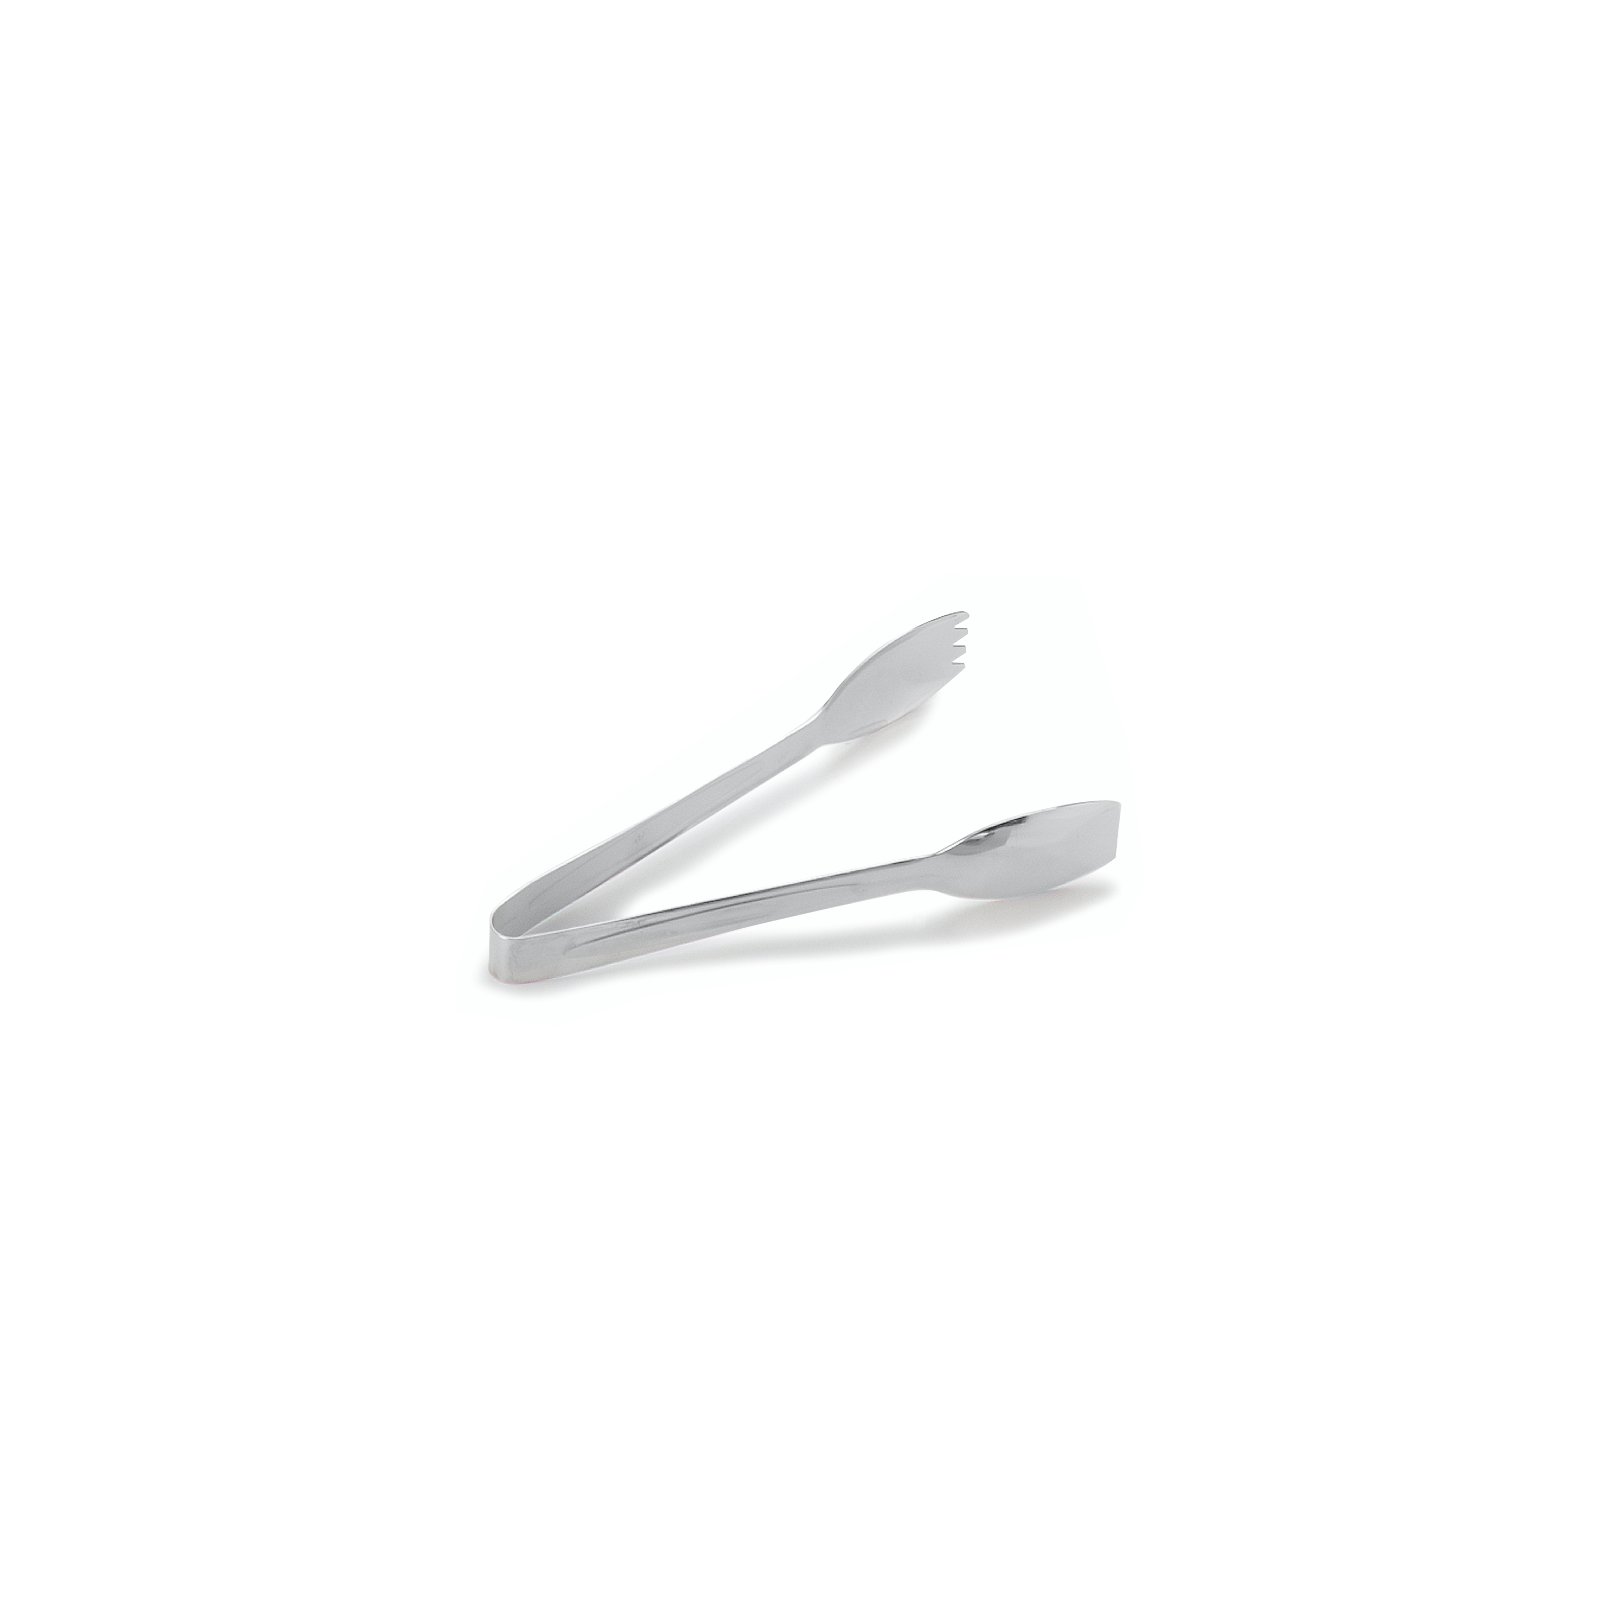 Aria™ Salad Tong 9 - Stainless Steel - Reliable Paper